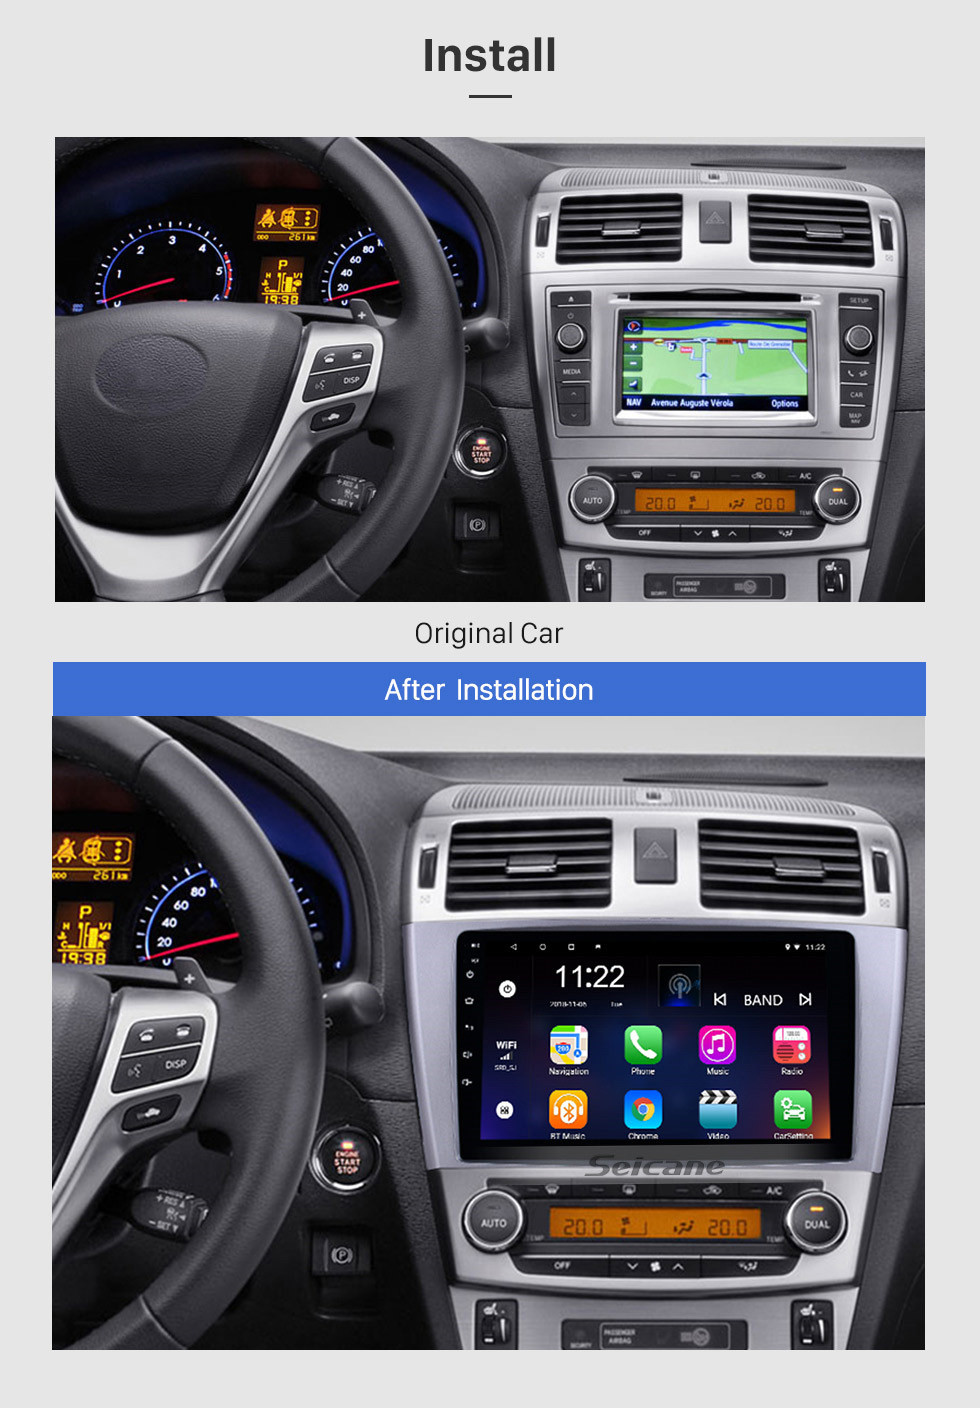 Link Control Mirror 13.0 Android Radio Wifi 2009-2013 for Navigation Toyota inch Bluetooth 9 1024*600 DVR with AVENSIS support Wheel GPS Touchscreen Steering Phone